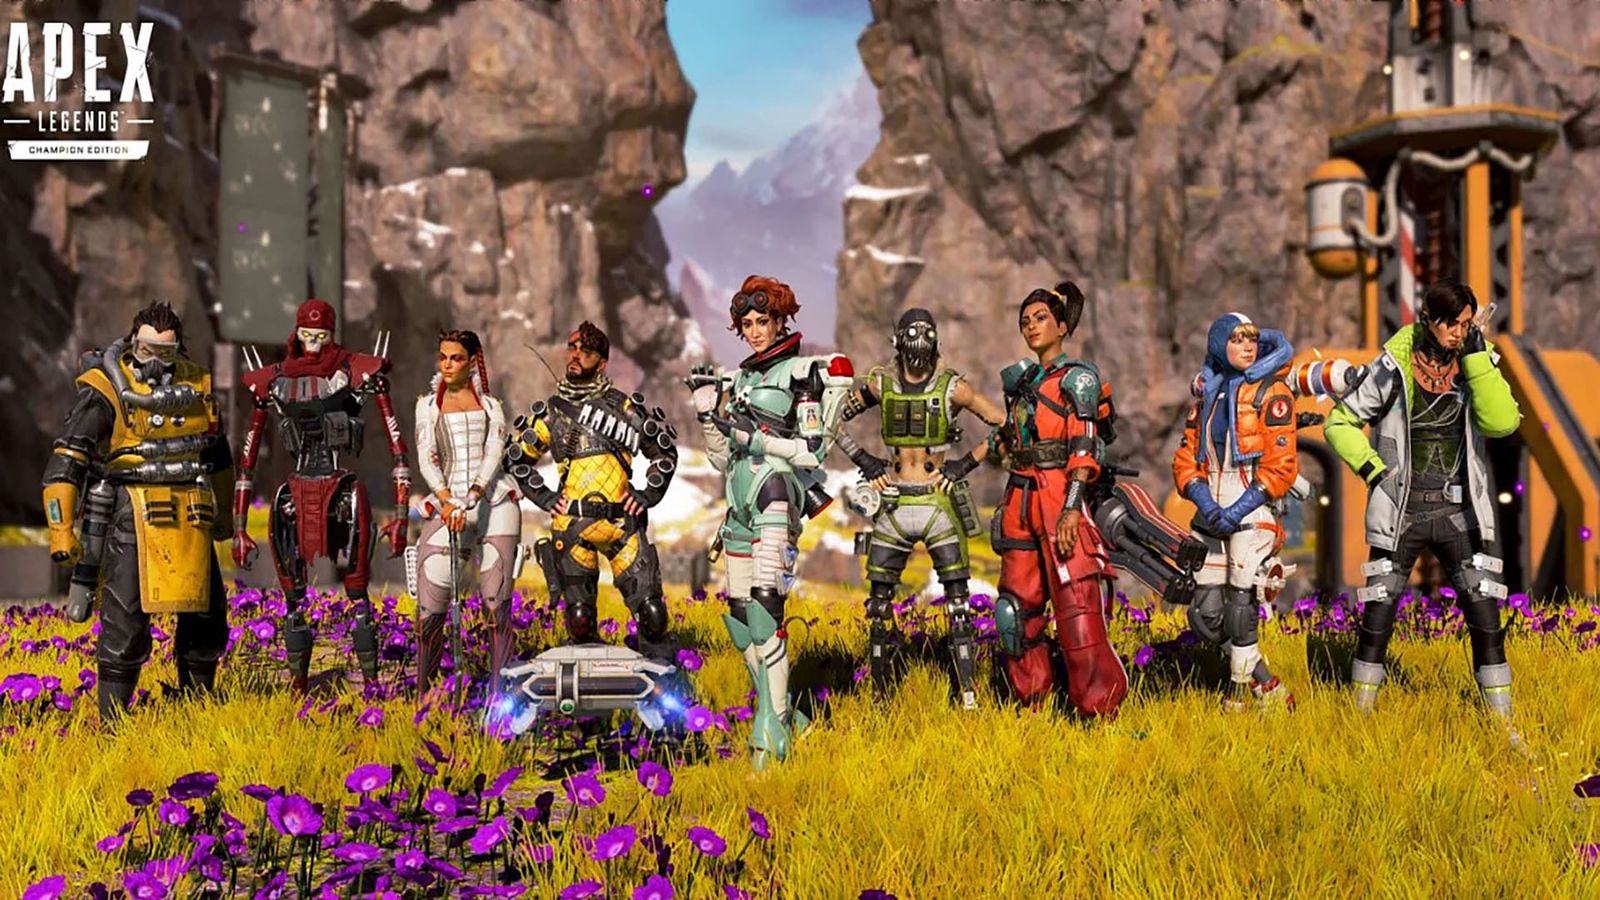 Screenshot of Apex Legends characters lined up in front of gap between two rocks